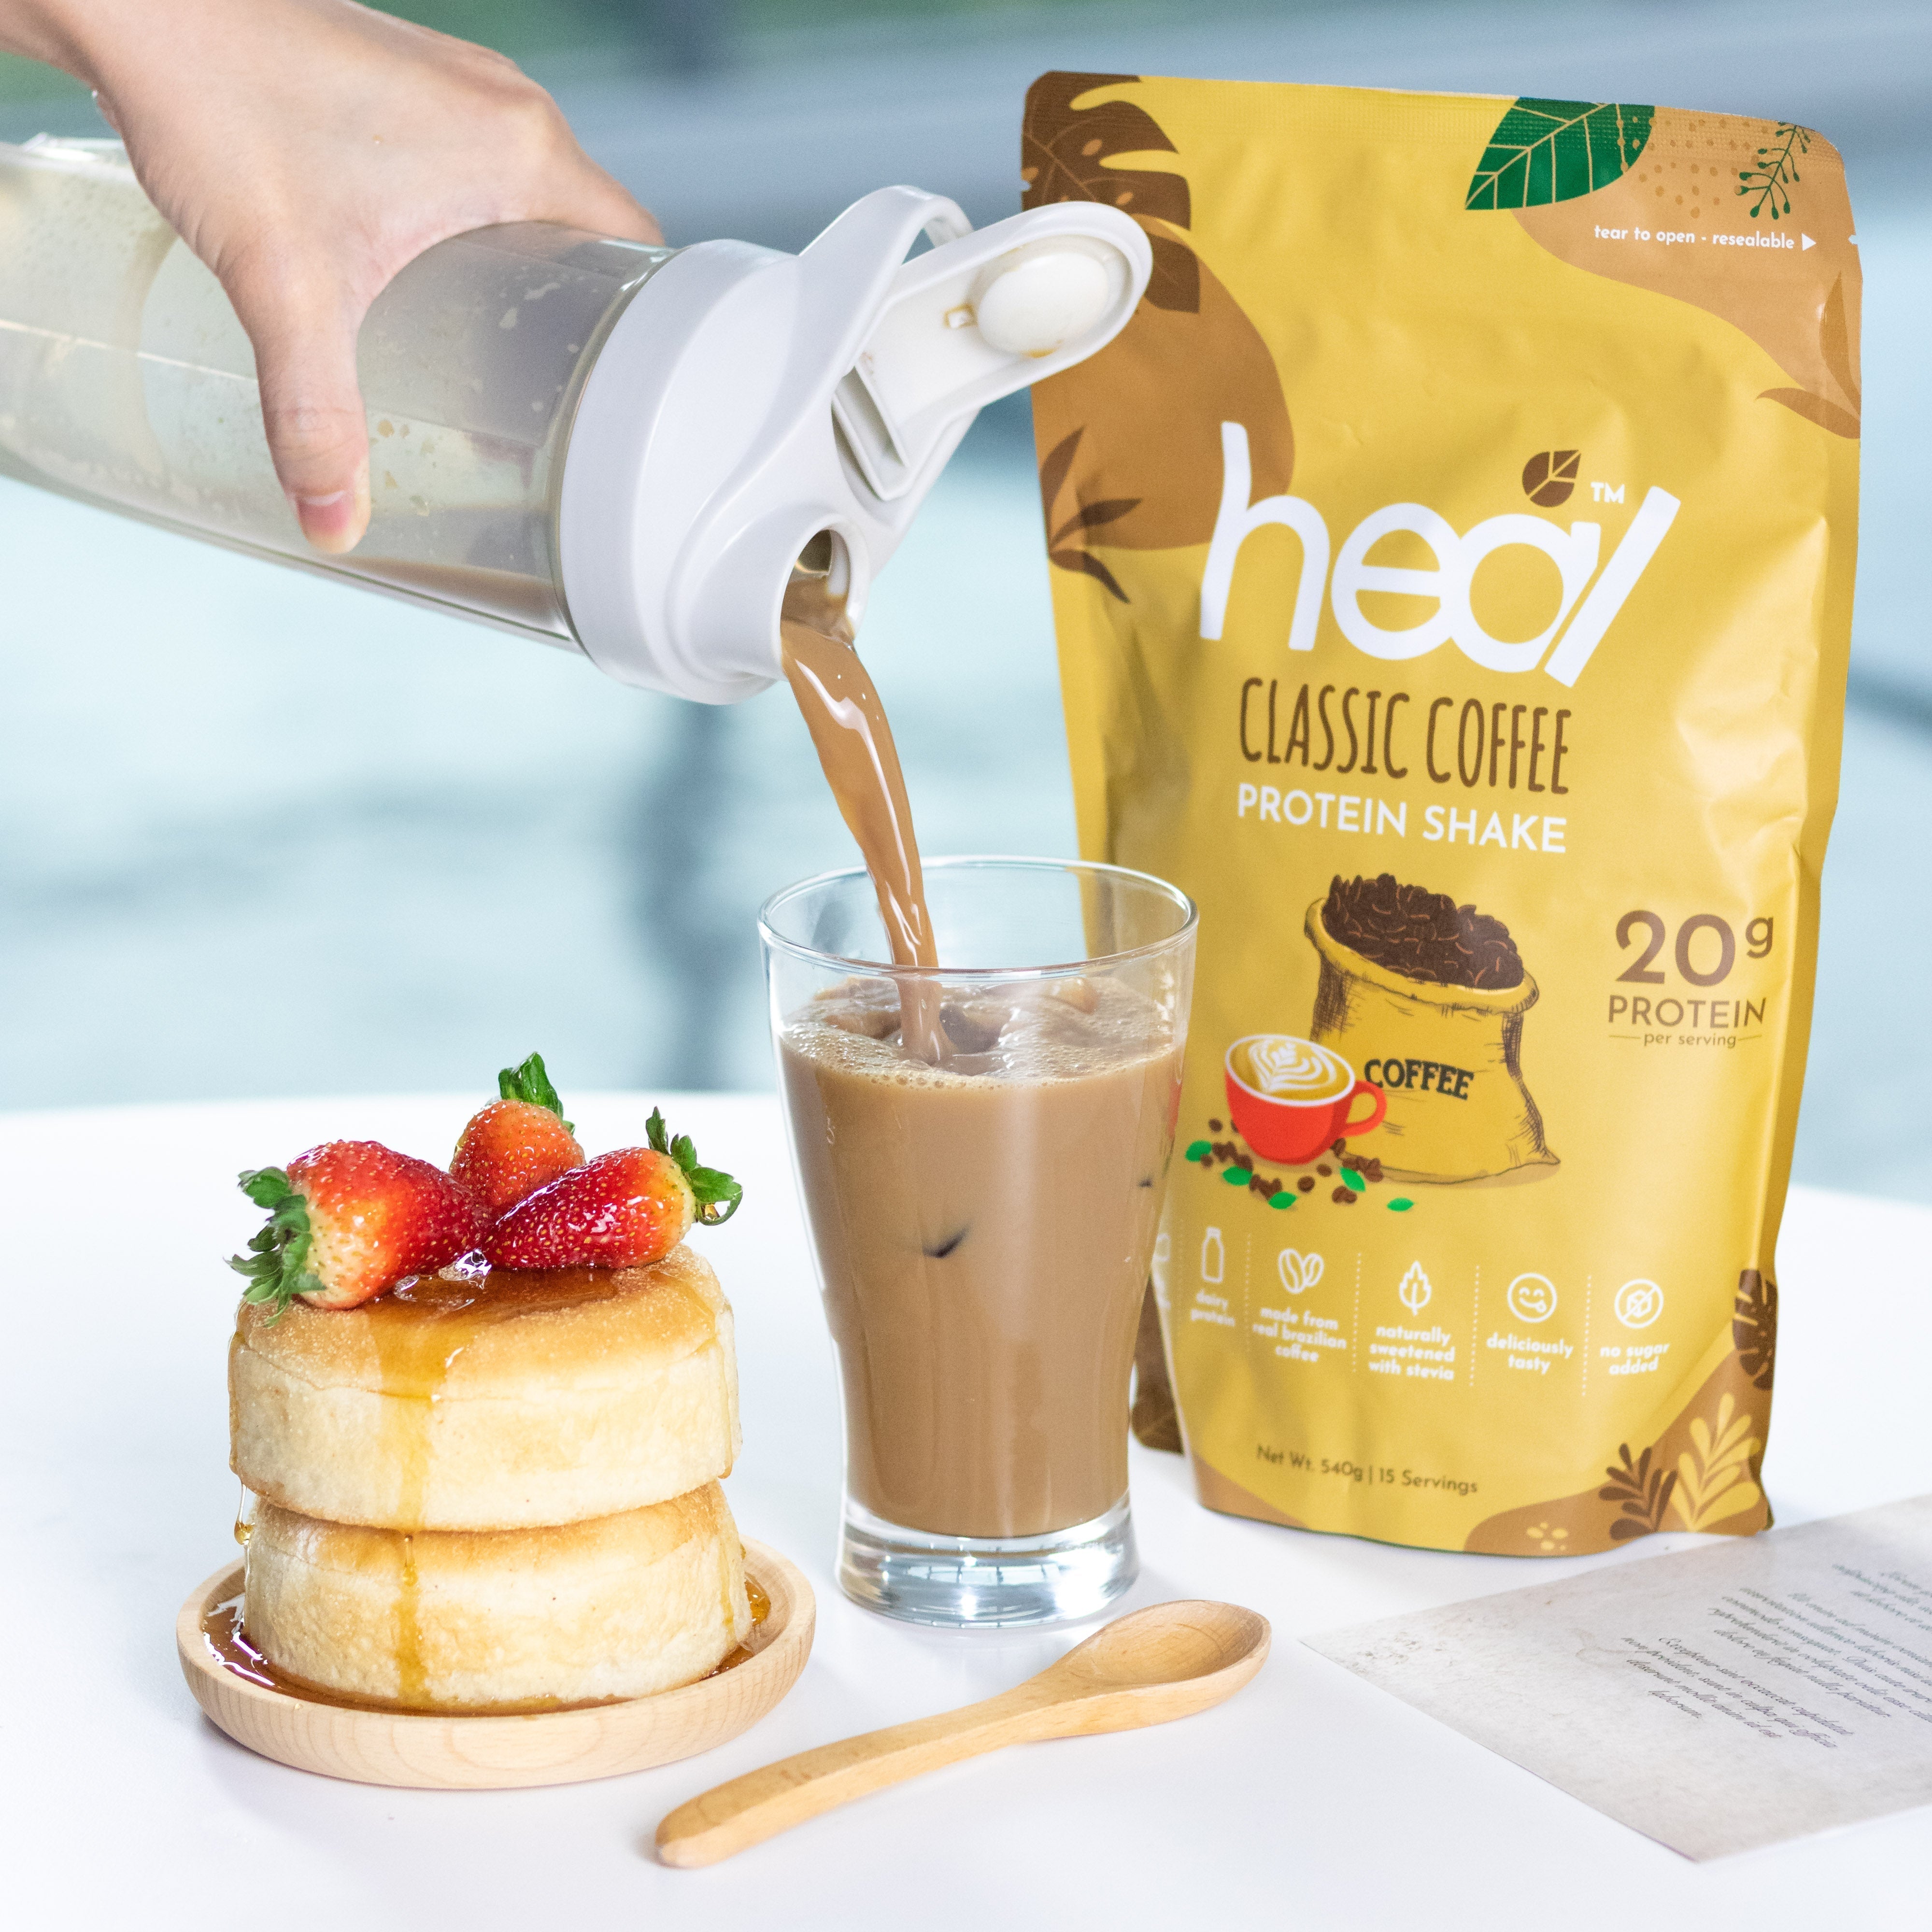 [Subscription Plan] Heal Classic Coffee Protein Shake, 15 Servings Value Pack